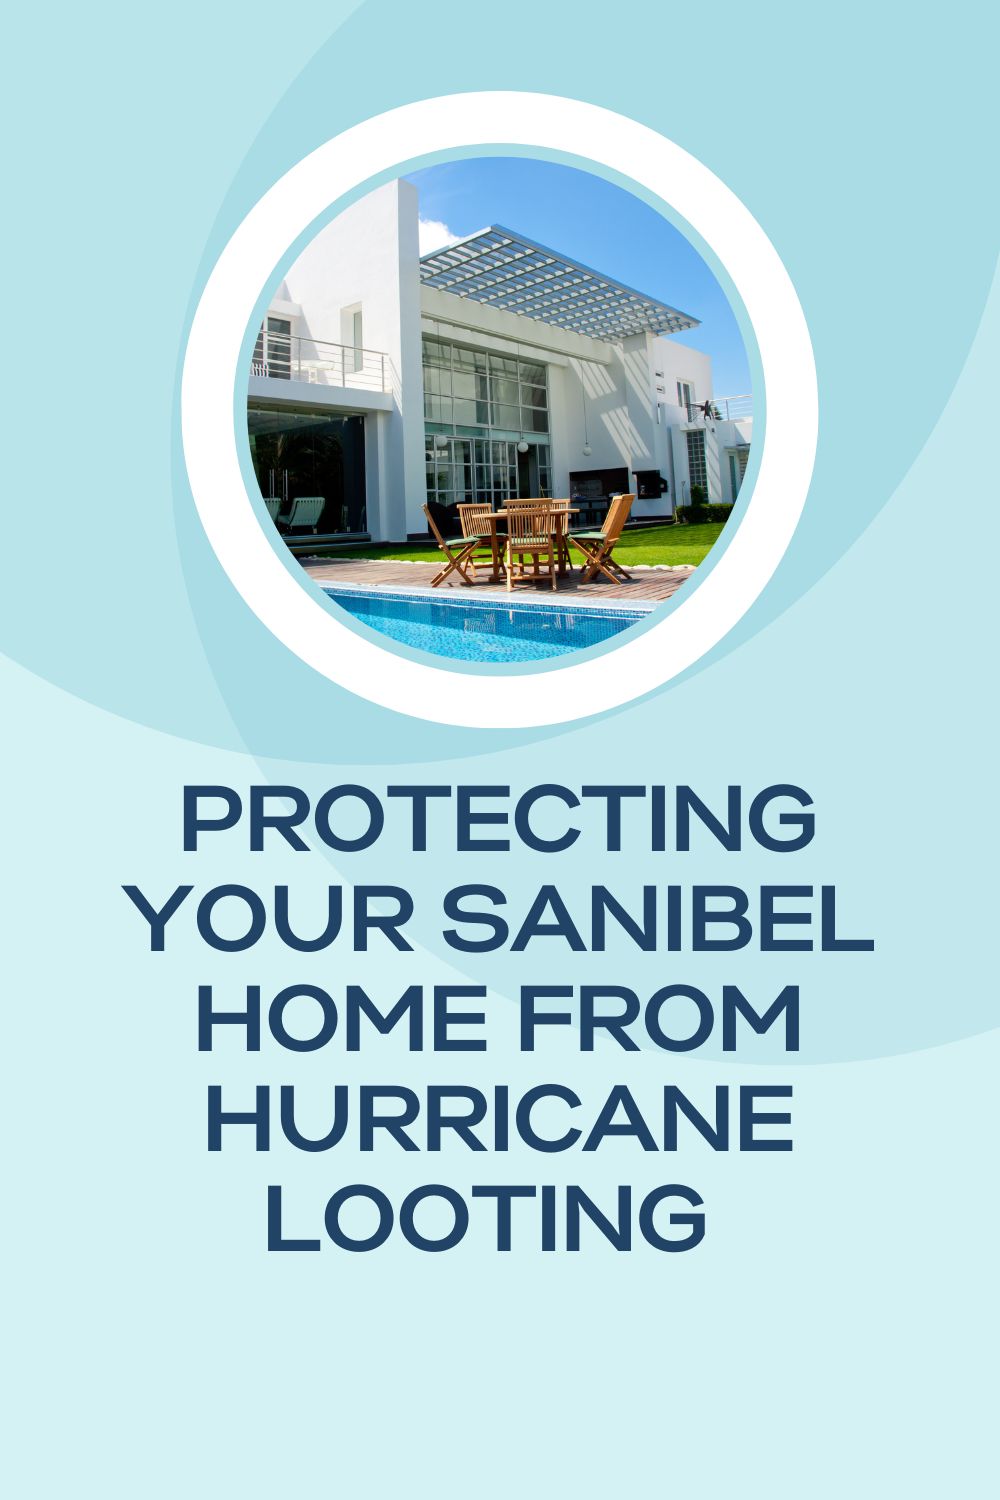 Protecting Your Sanibel Home from Hurricane Looting